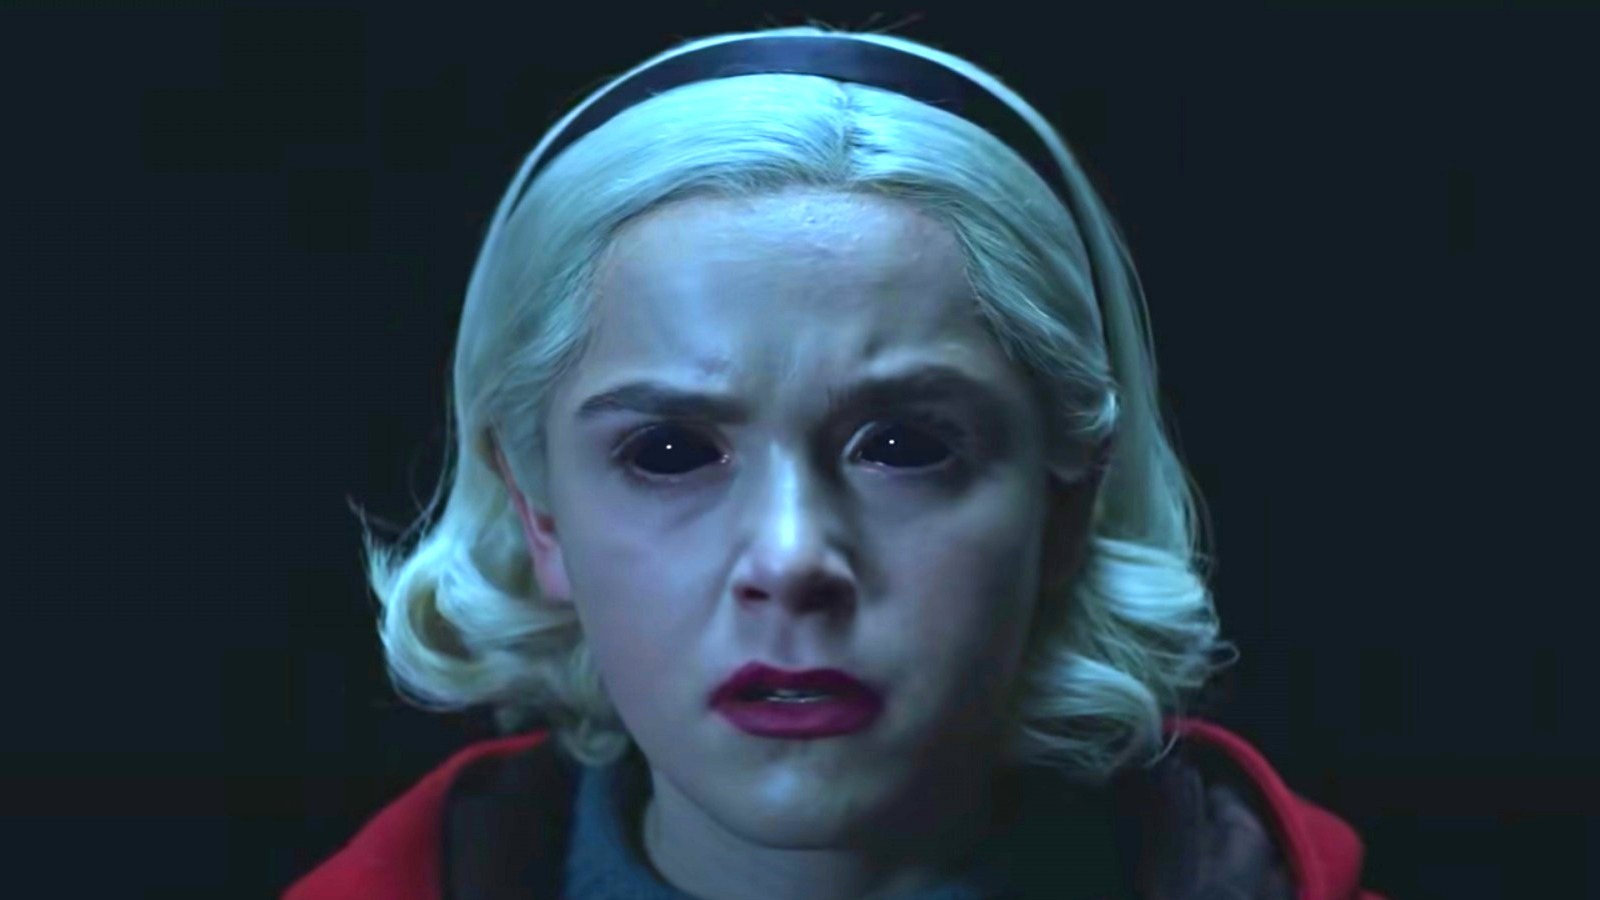 grundigt Åbent Ambitiøs How Real Was The Witchcraft In Netflix's Chilling Adventures Of Sabrina?